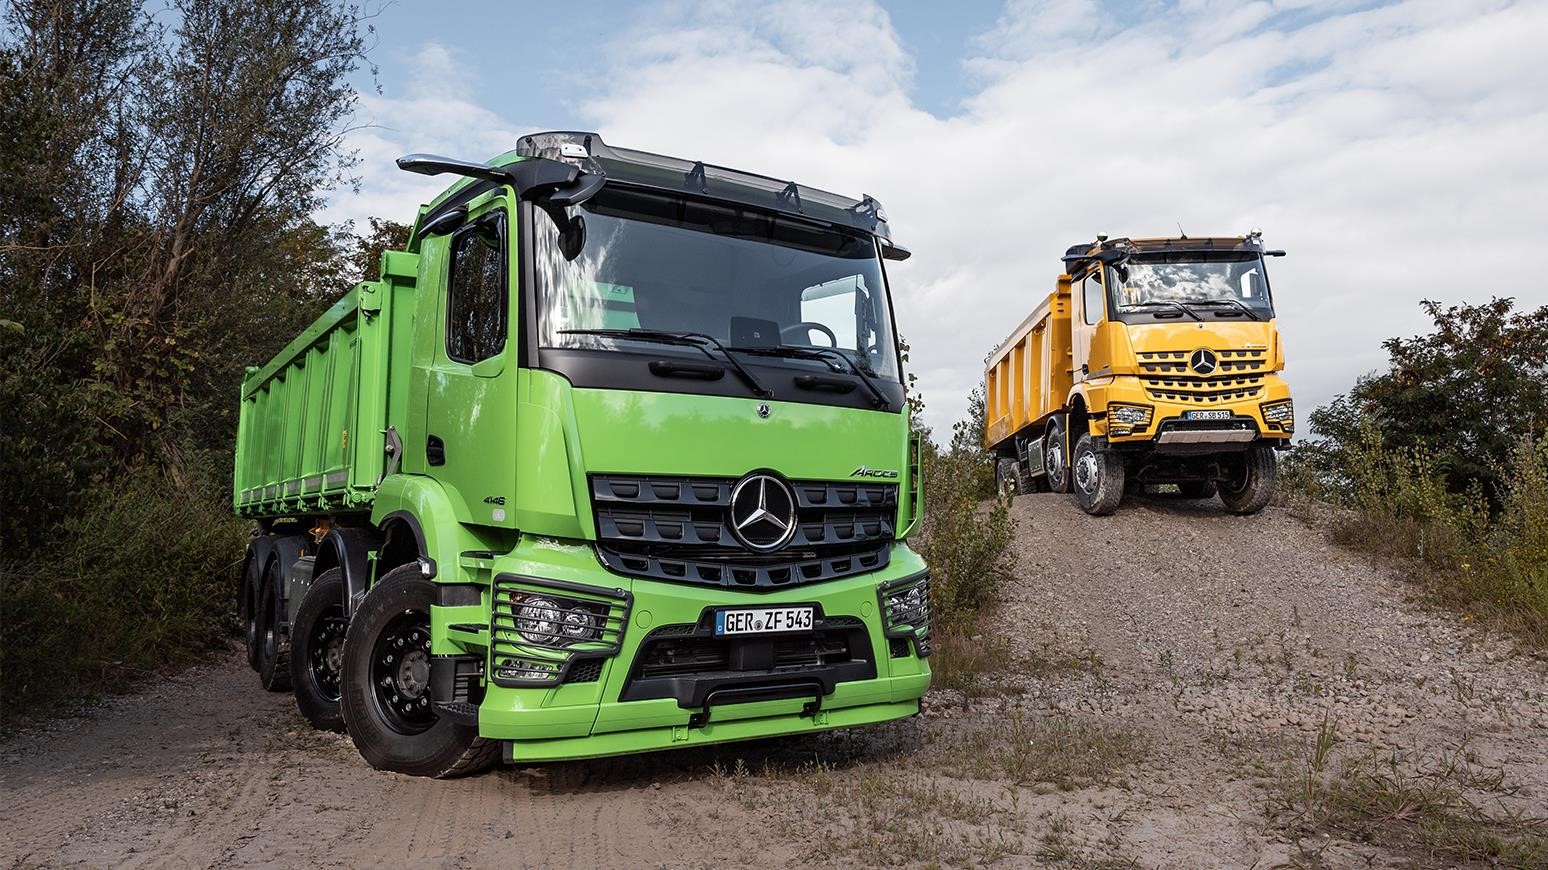 Mercedes-Benz Unveils New Arocs Trucks With Cabs, Engines & Safety Features Tailored To The Construction Industry